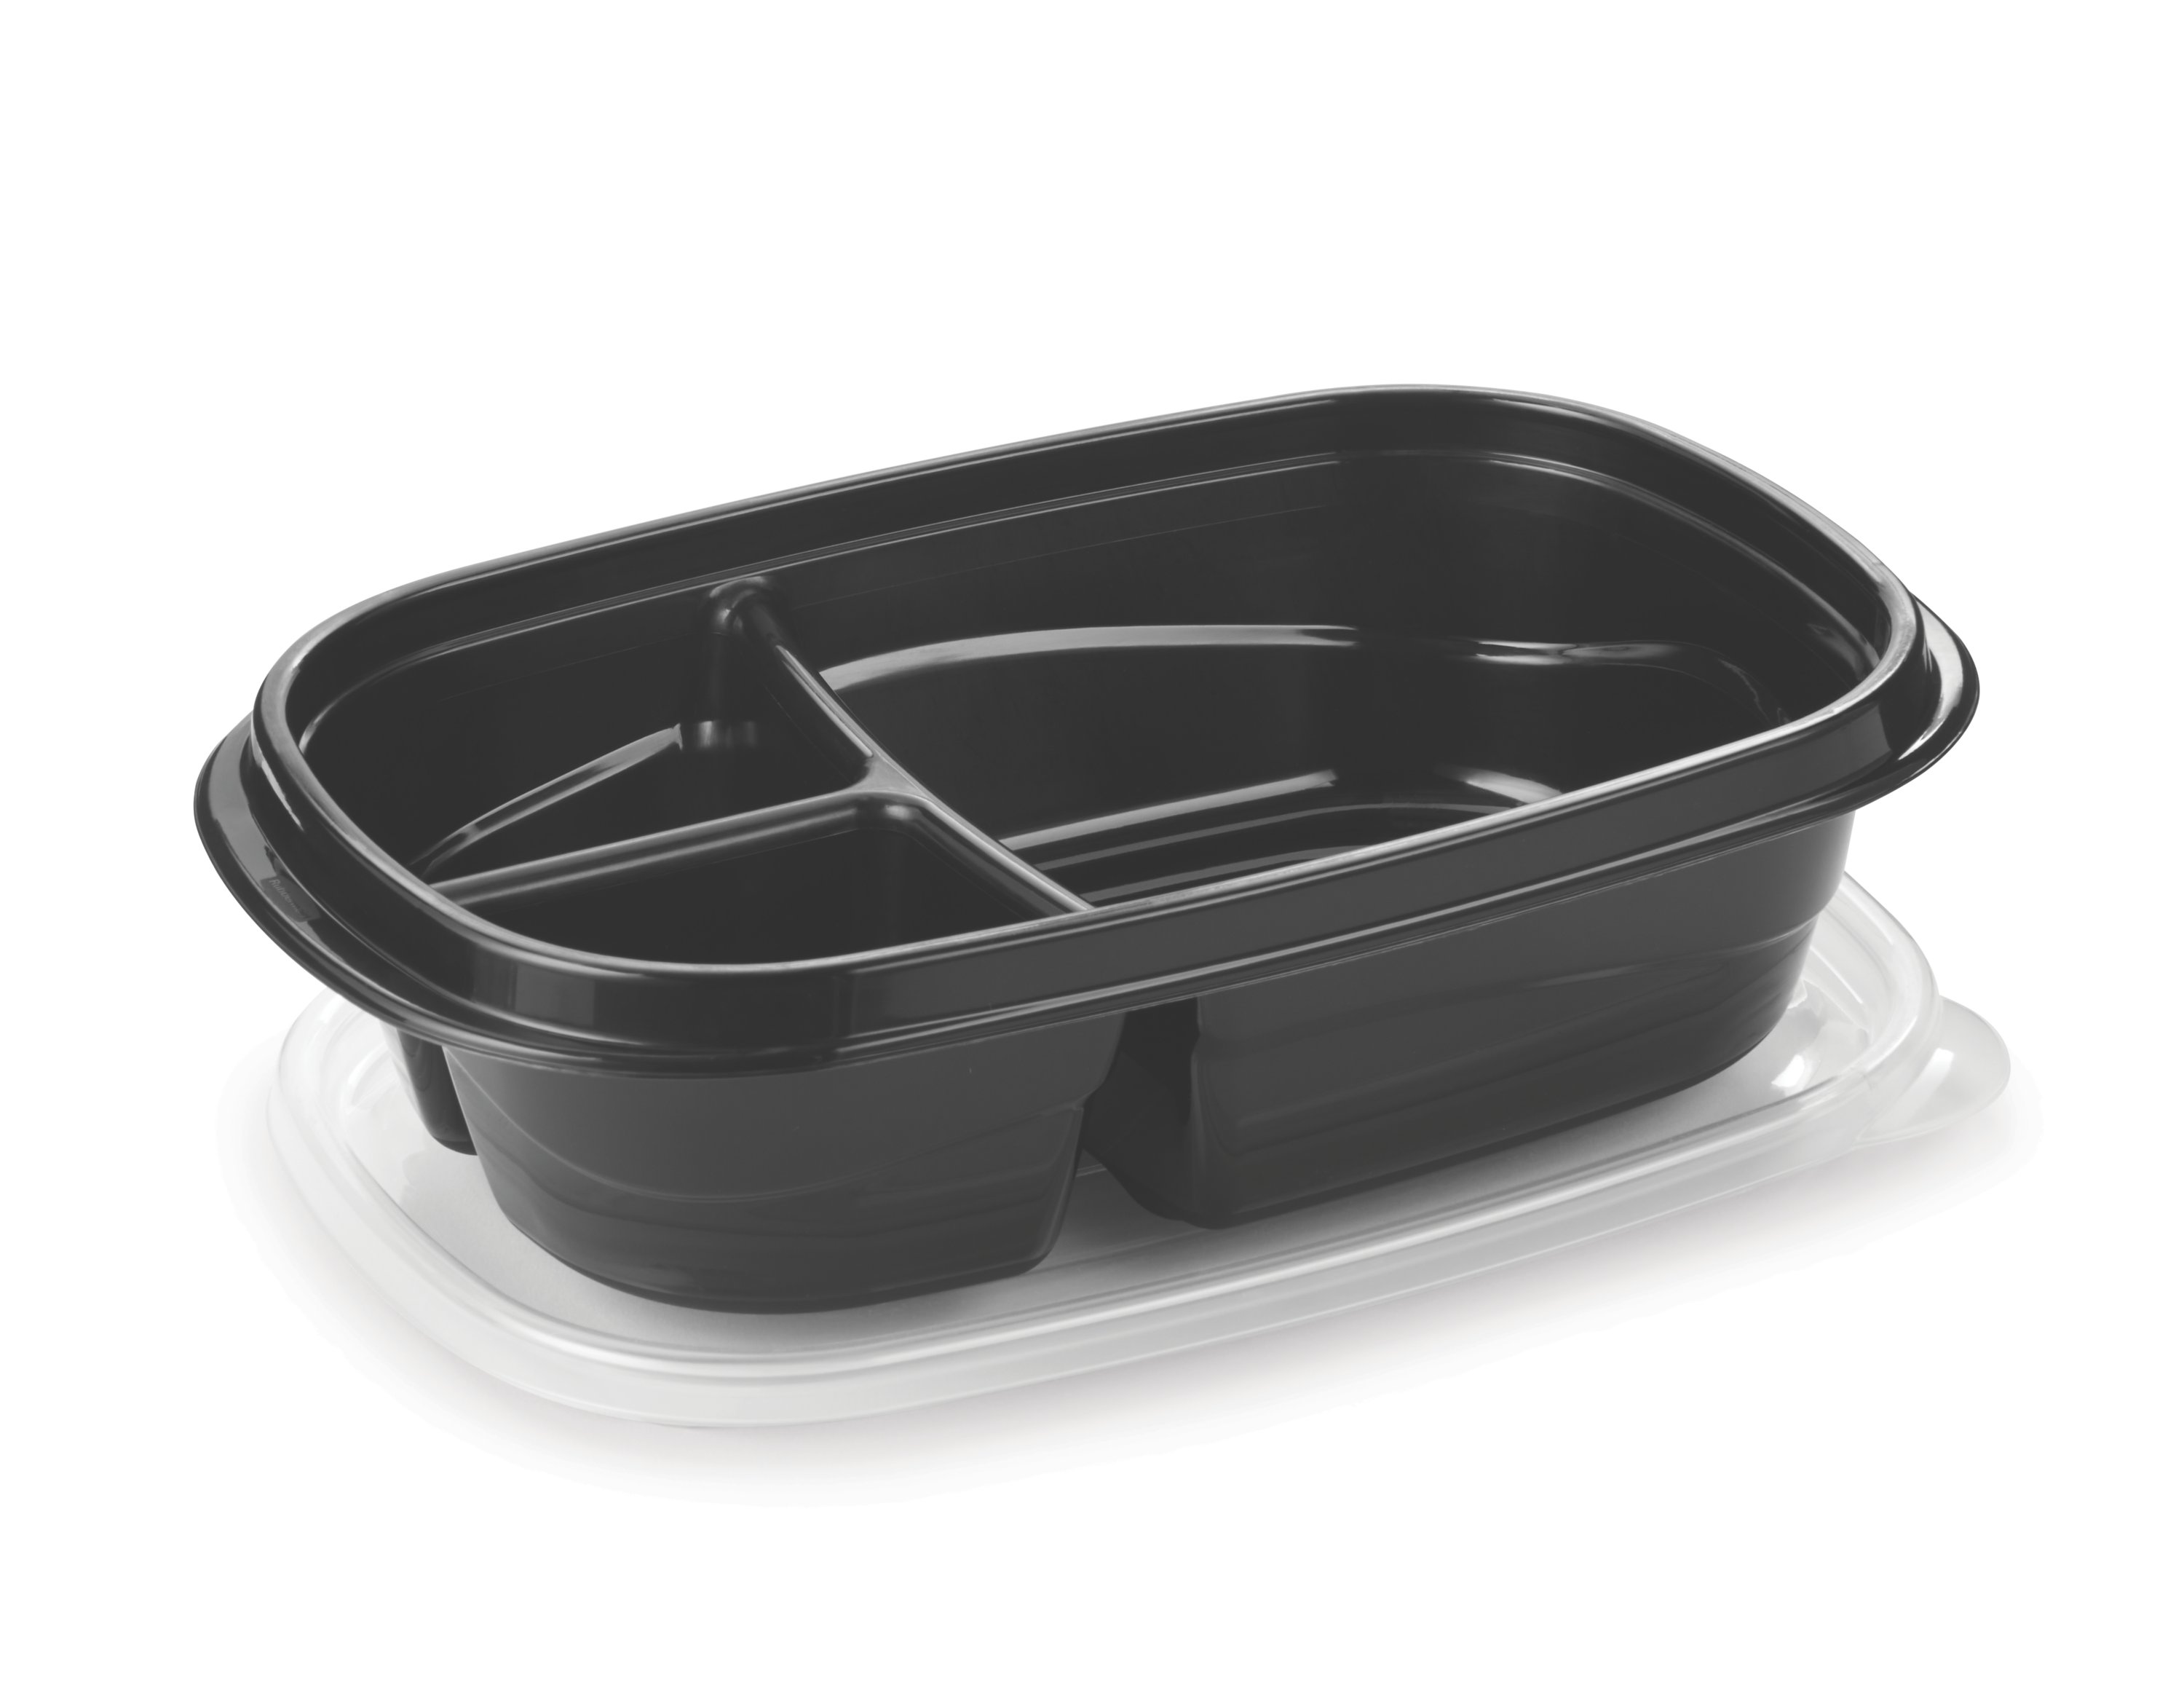 Rubbermaid Take Alongs Mini Snackers 4 0z 6 containers 